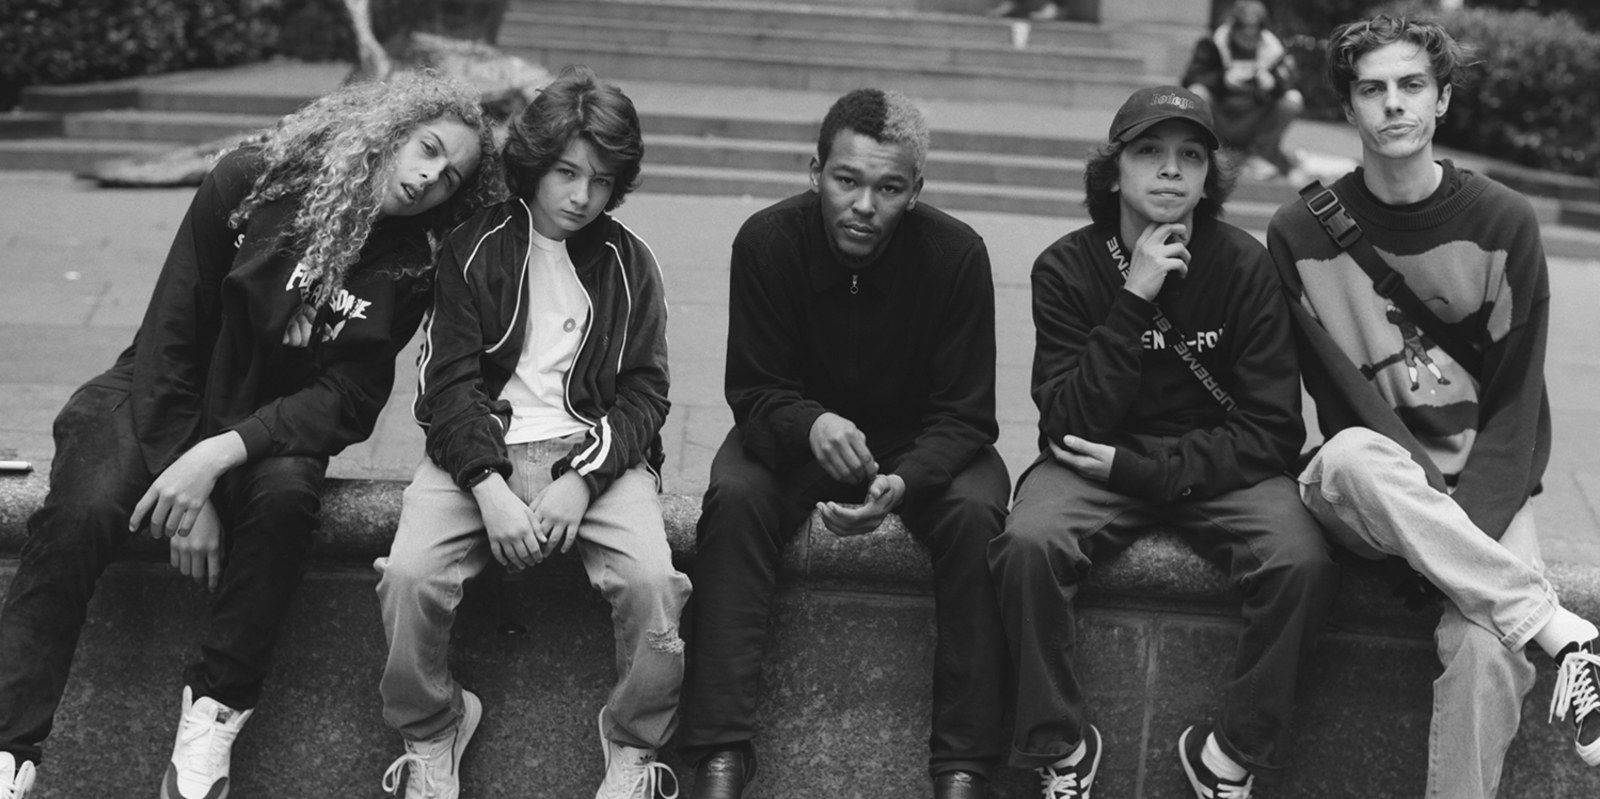 Meet the “Mid90s” Cast of Skate Kids From Jonah Hill's First Movie